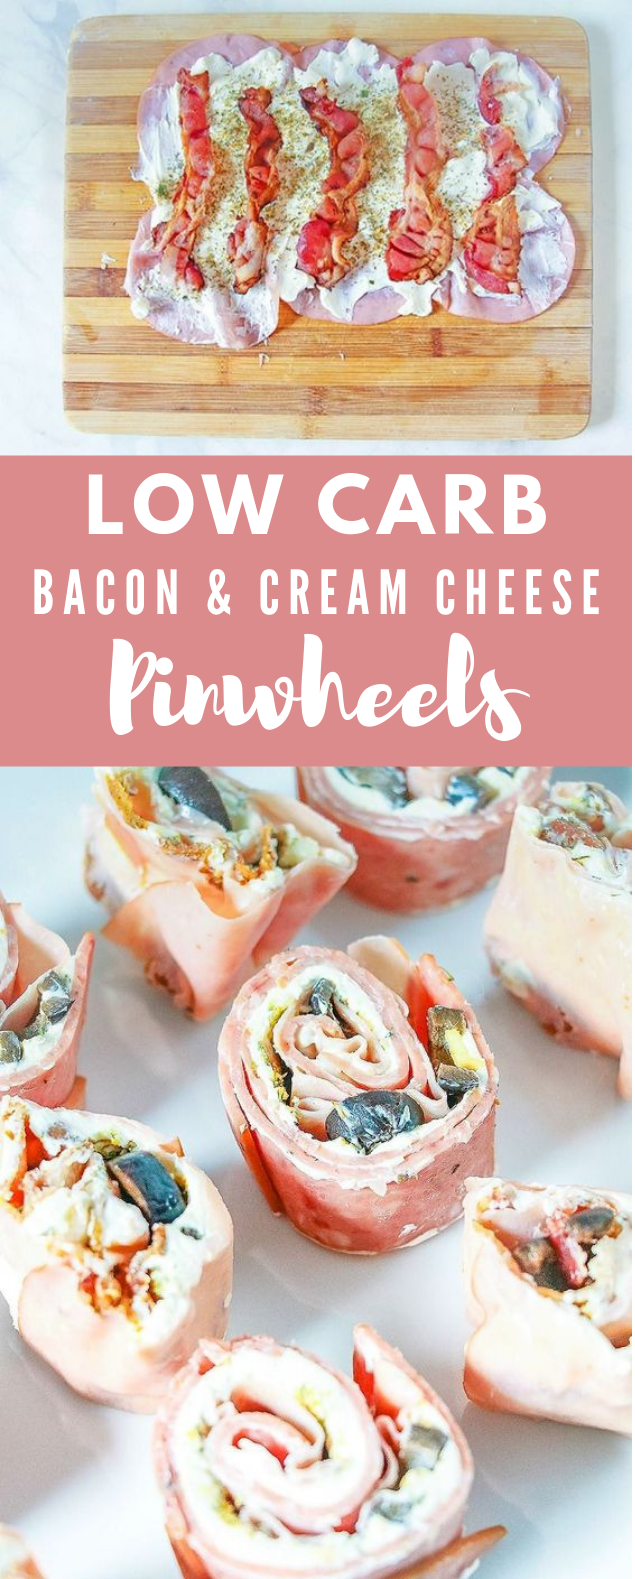 LOW CARB PINWHEELS WITH BACON AND CREAM CHEESE #LowCarb #Pinwheels